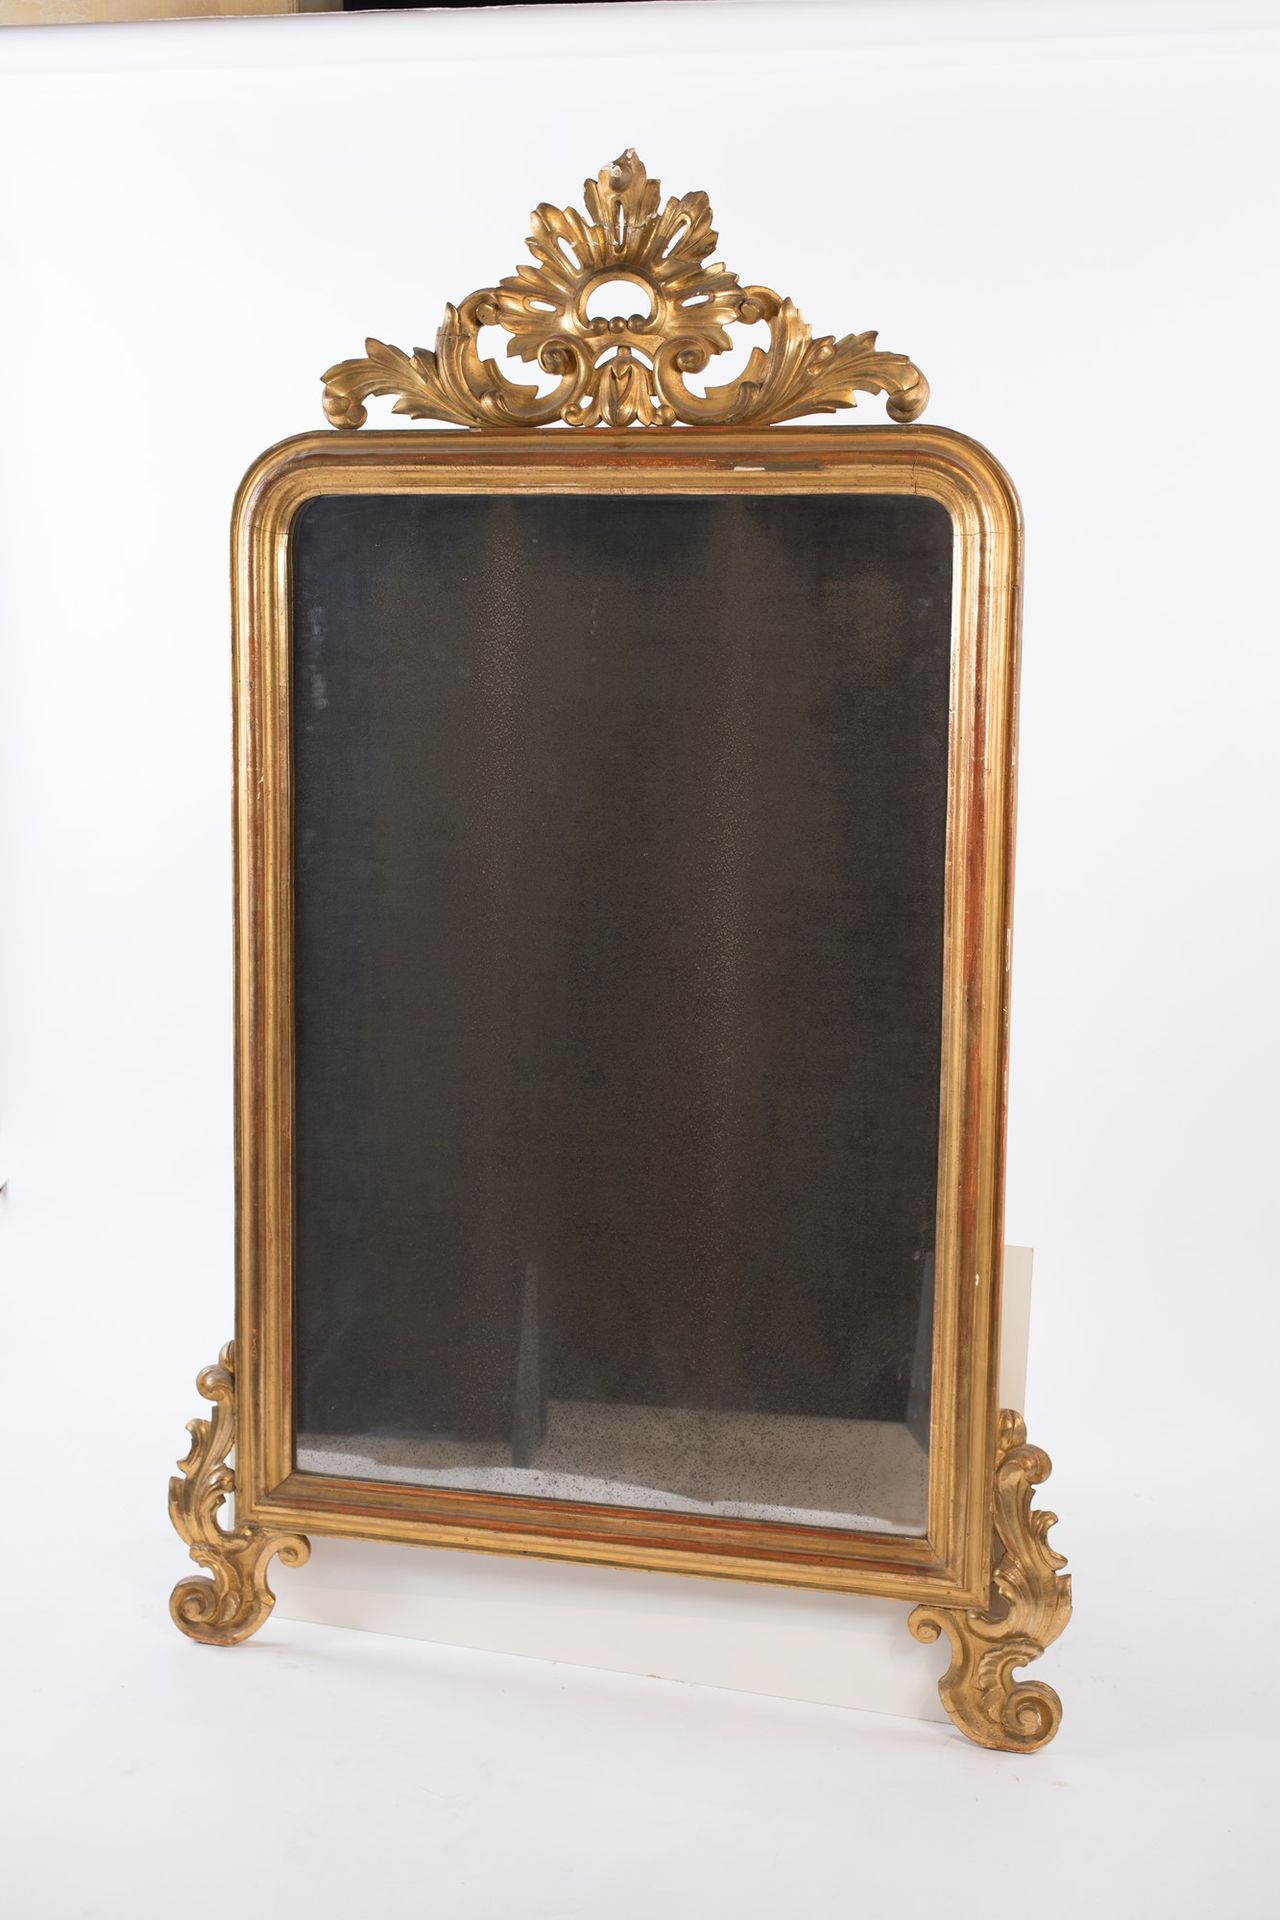 Napoleon III period gilded wood mirror with molded frame in gilded wood supporte&hellip;